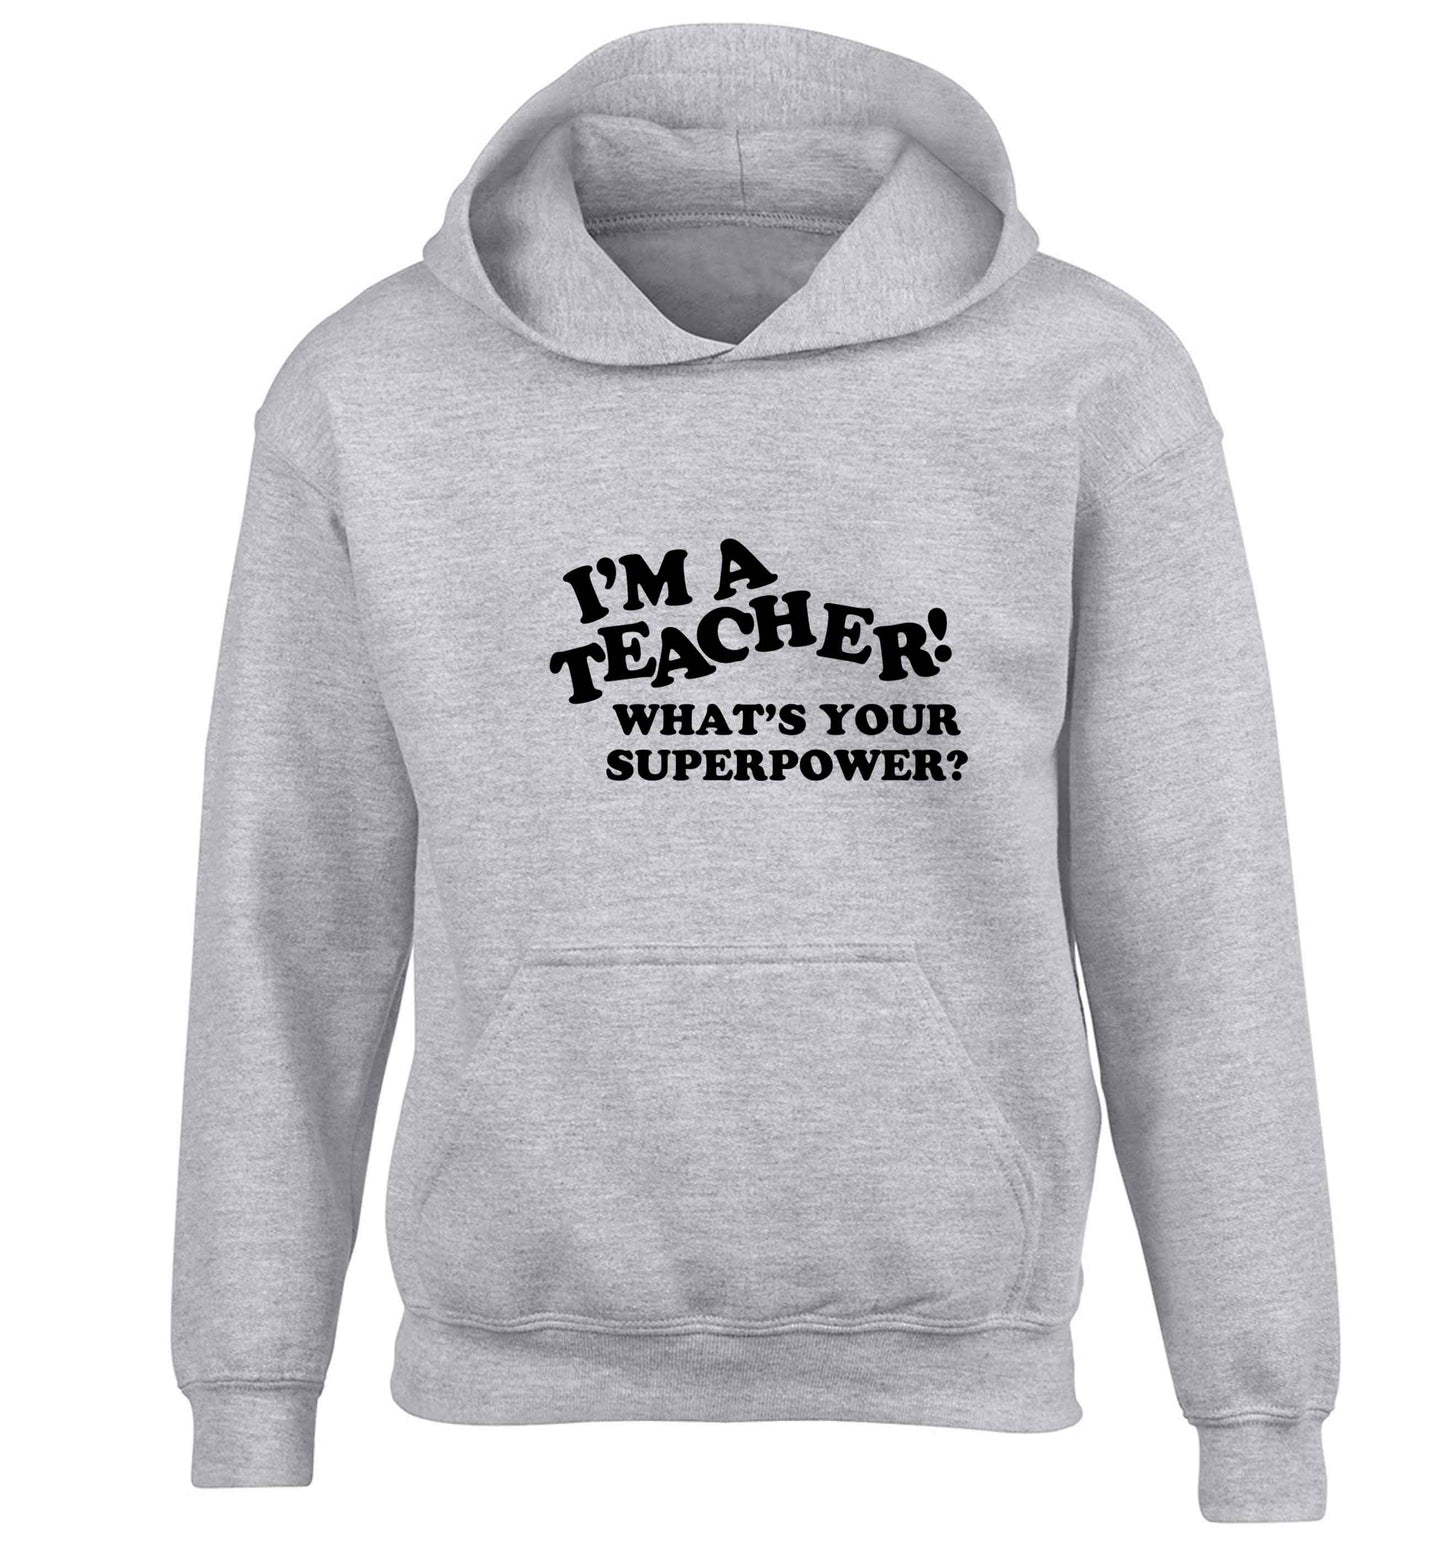 I'm a teacher what's your superpower?! children's grey hoodie 12-13 Years